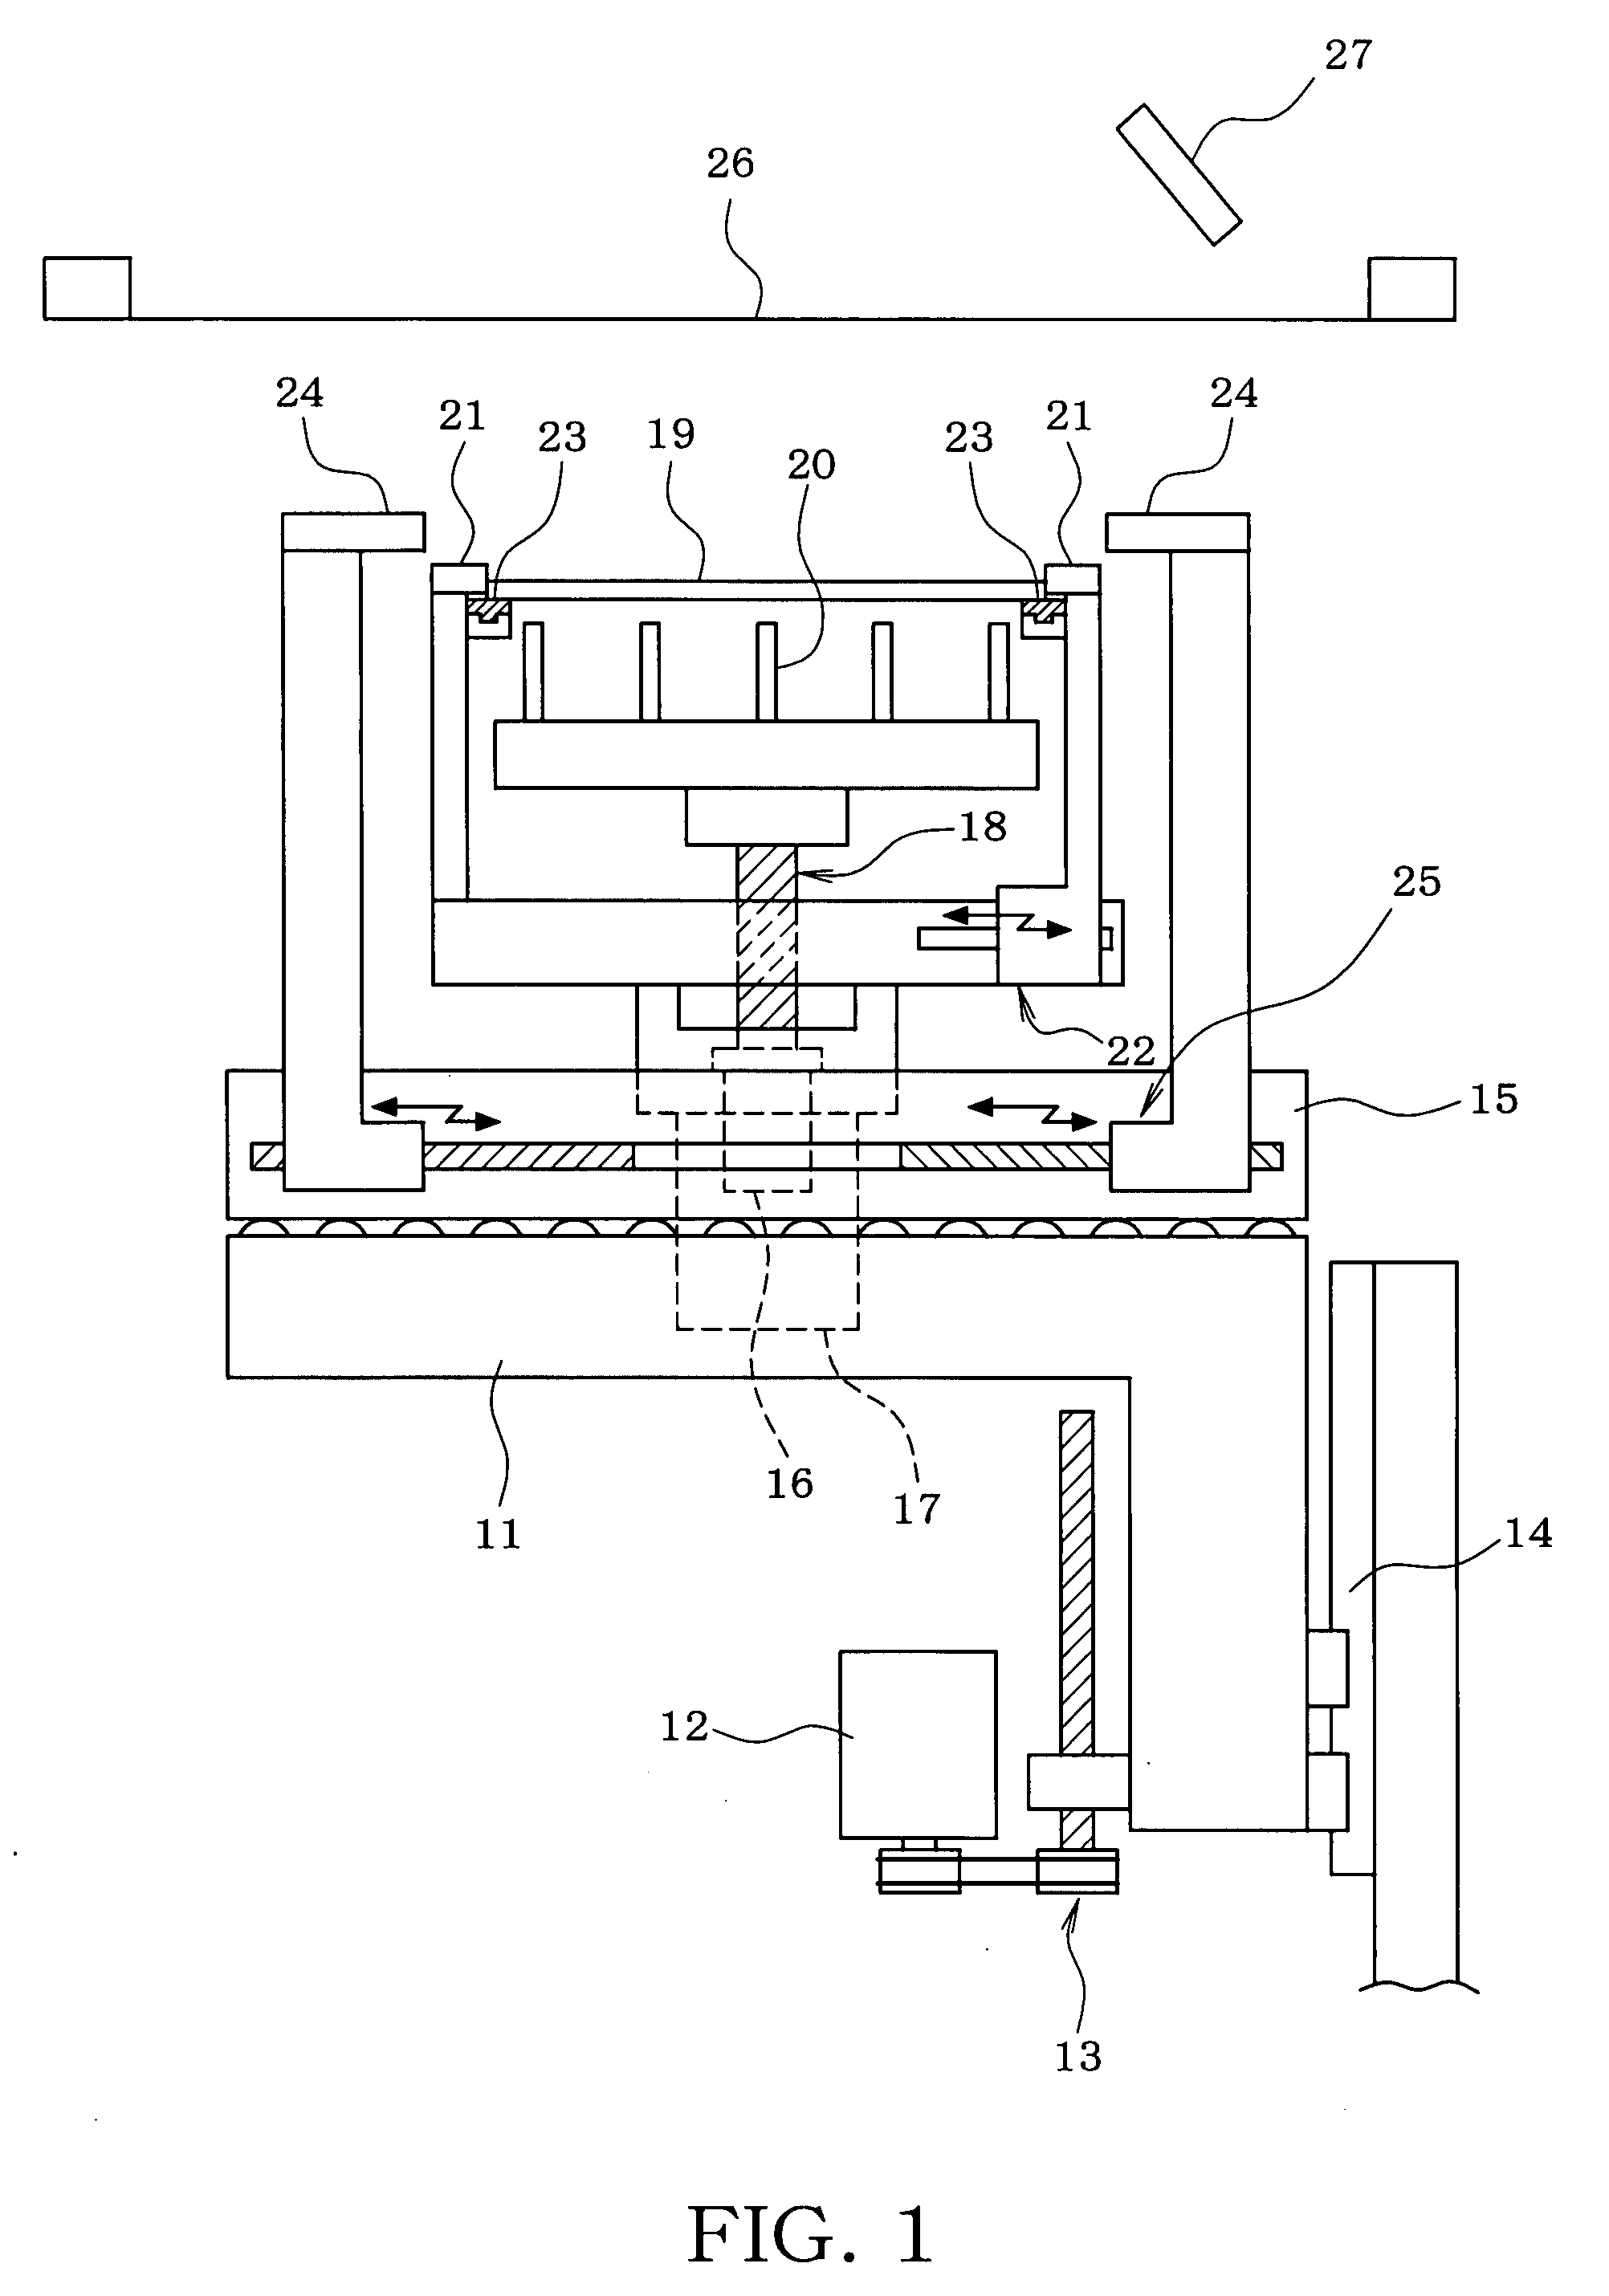 Method and apparatus for screen printing